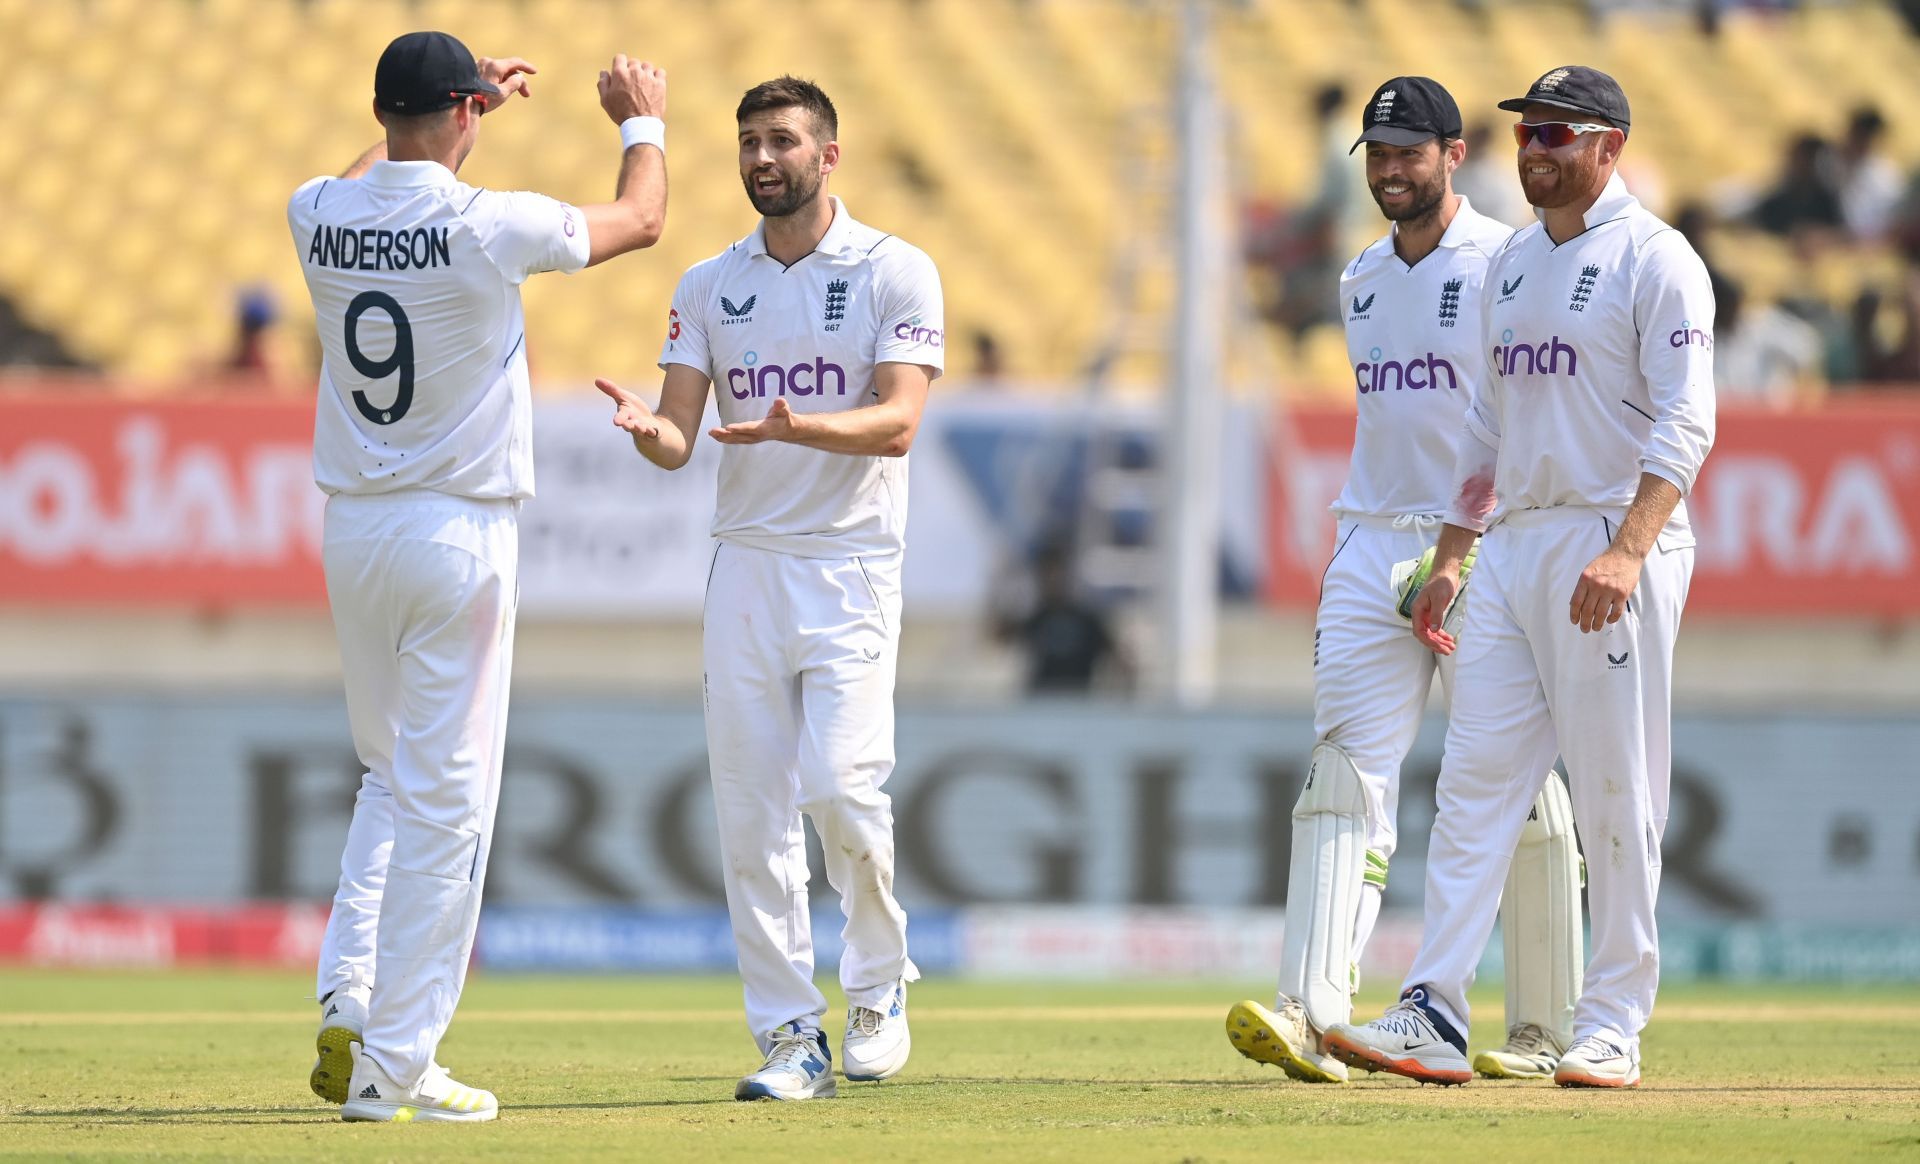 Mark Wood celebrating an Indian wicket in the ongoing series.